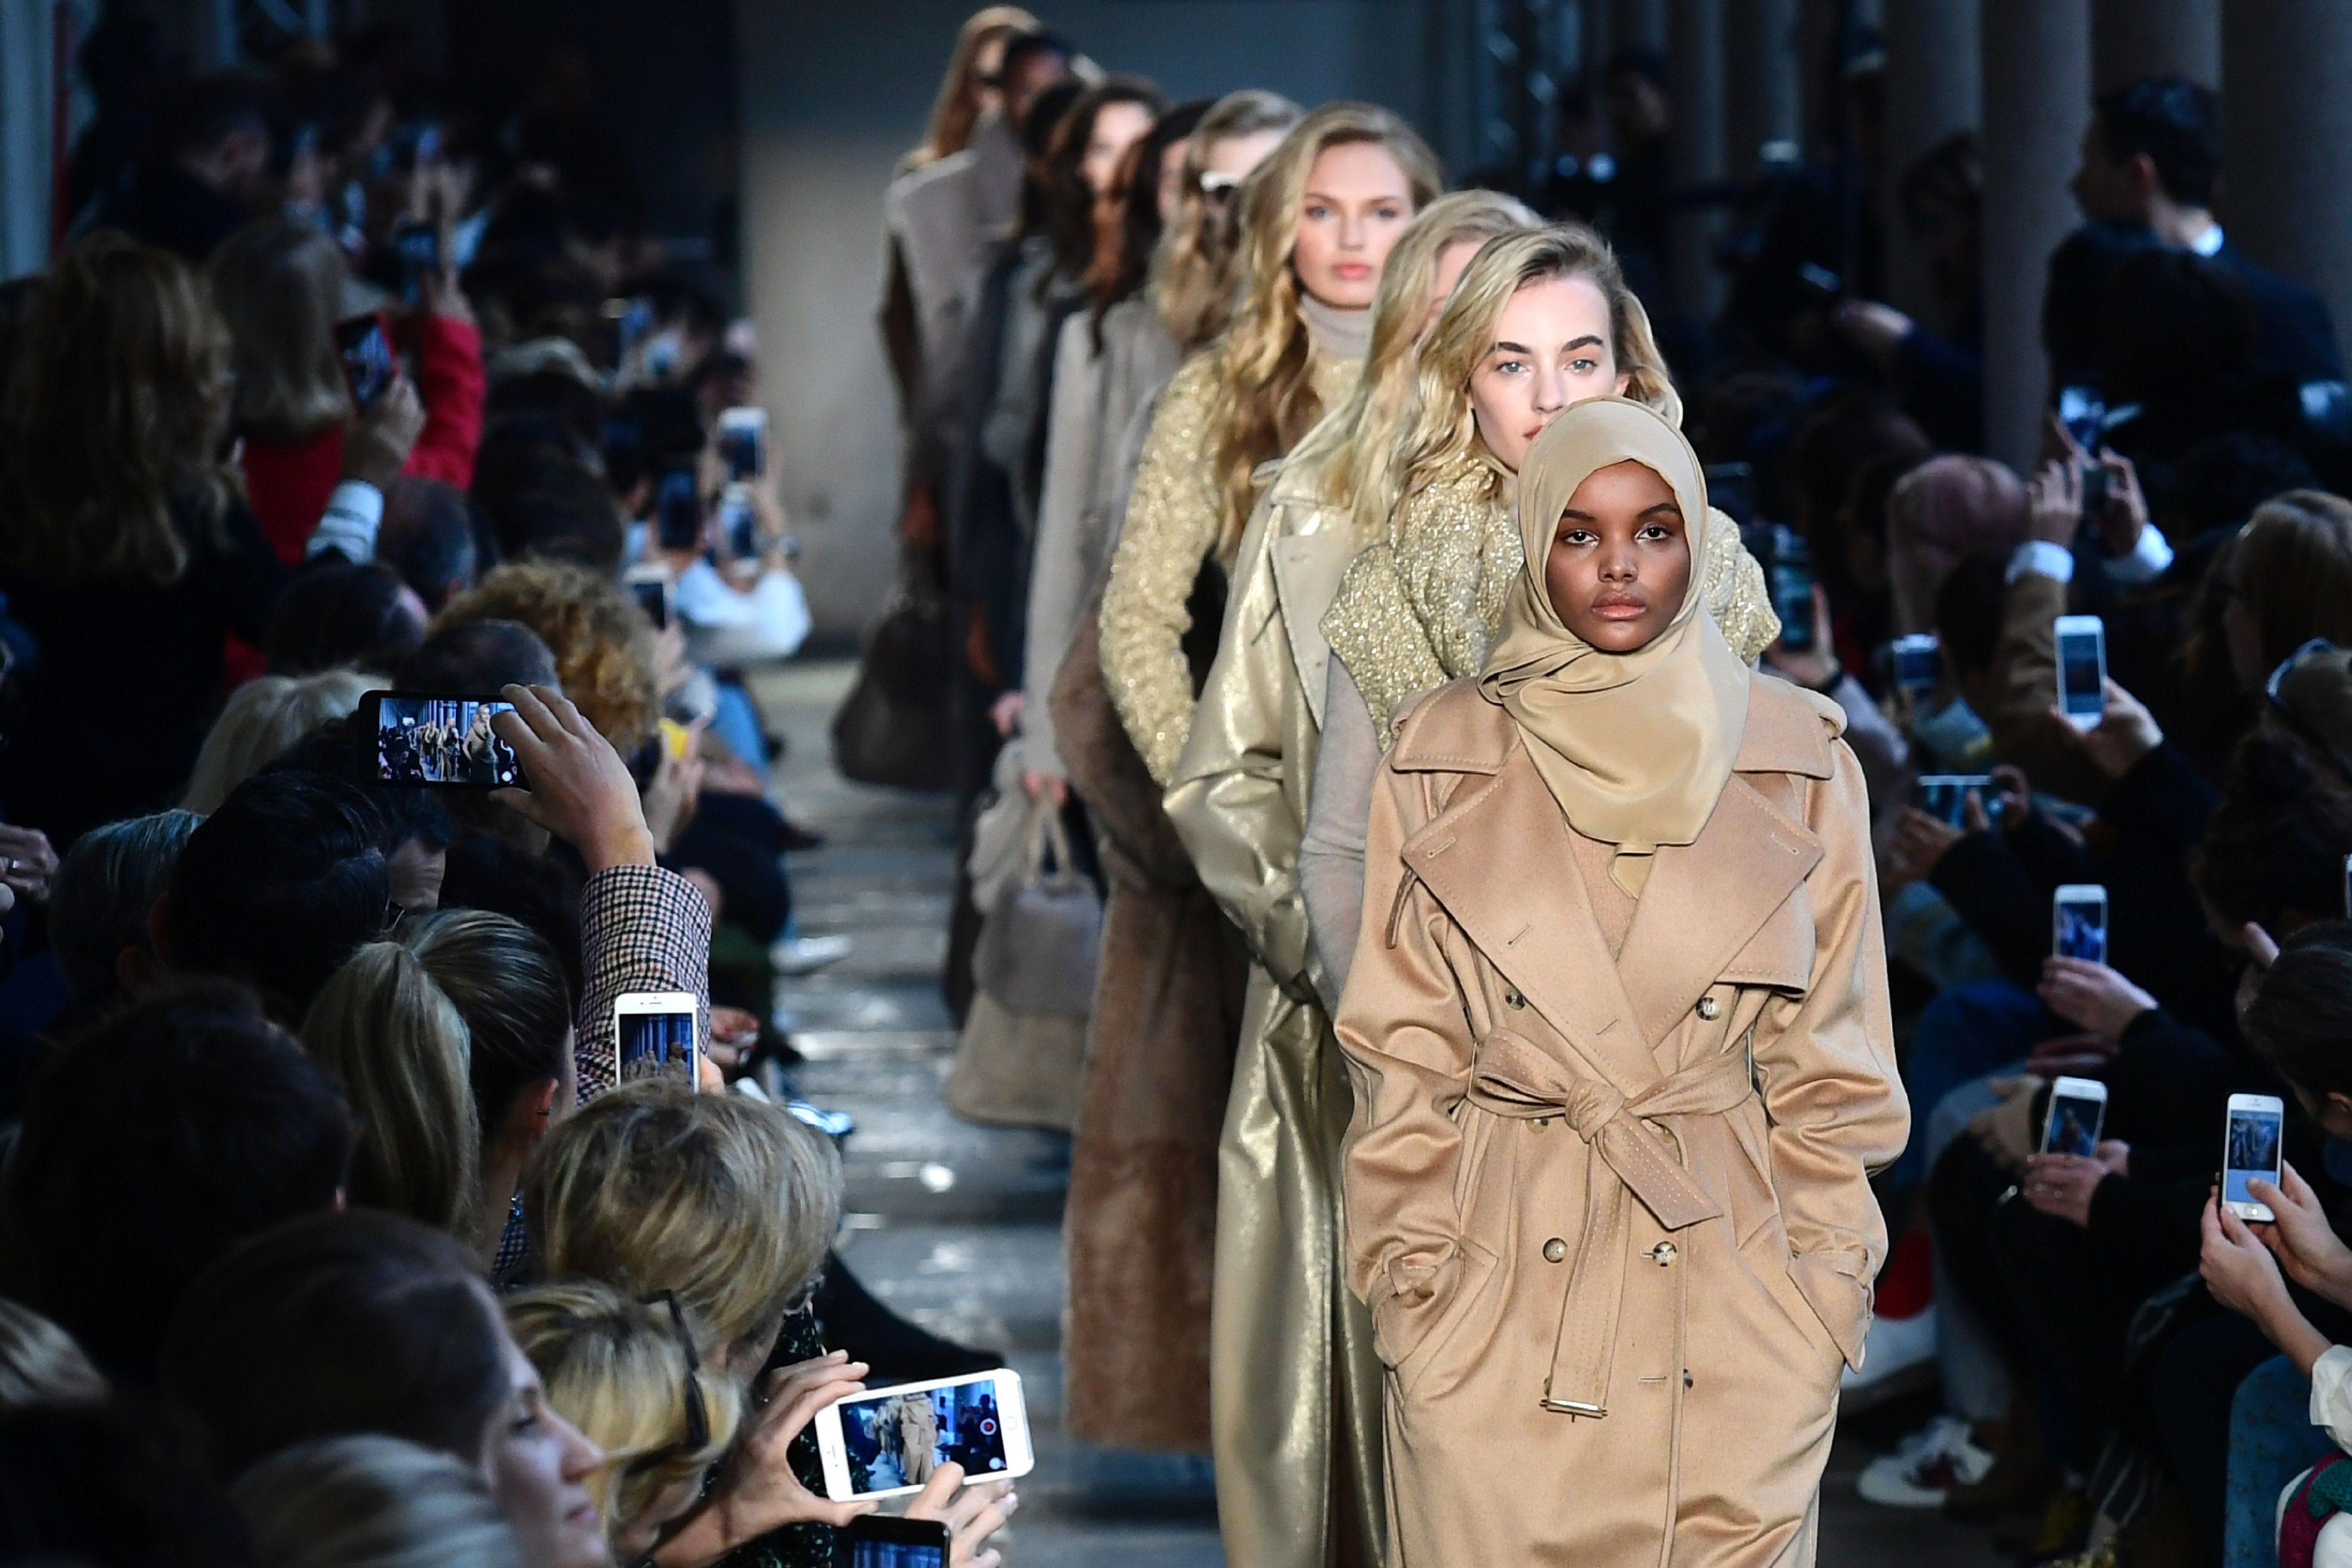 US-Somalia model Halima Aden presents a creation for fashion house Max Mara during the Women's Fall/Winter 2017/2018 fashion week in Milan, on February 23, 2017.  / AFP / Miguel MEDINA        (Photo credit should read MIGUEL MEDINA/AFP/Getty Images) (MIGUEL MEDINA&mdash;AFP/Getty Images)